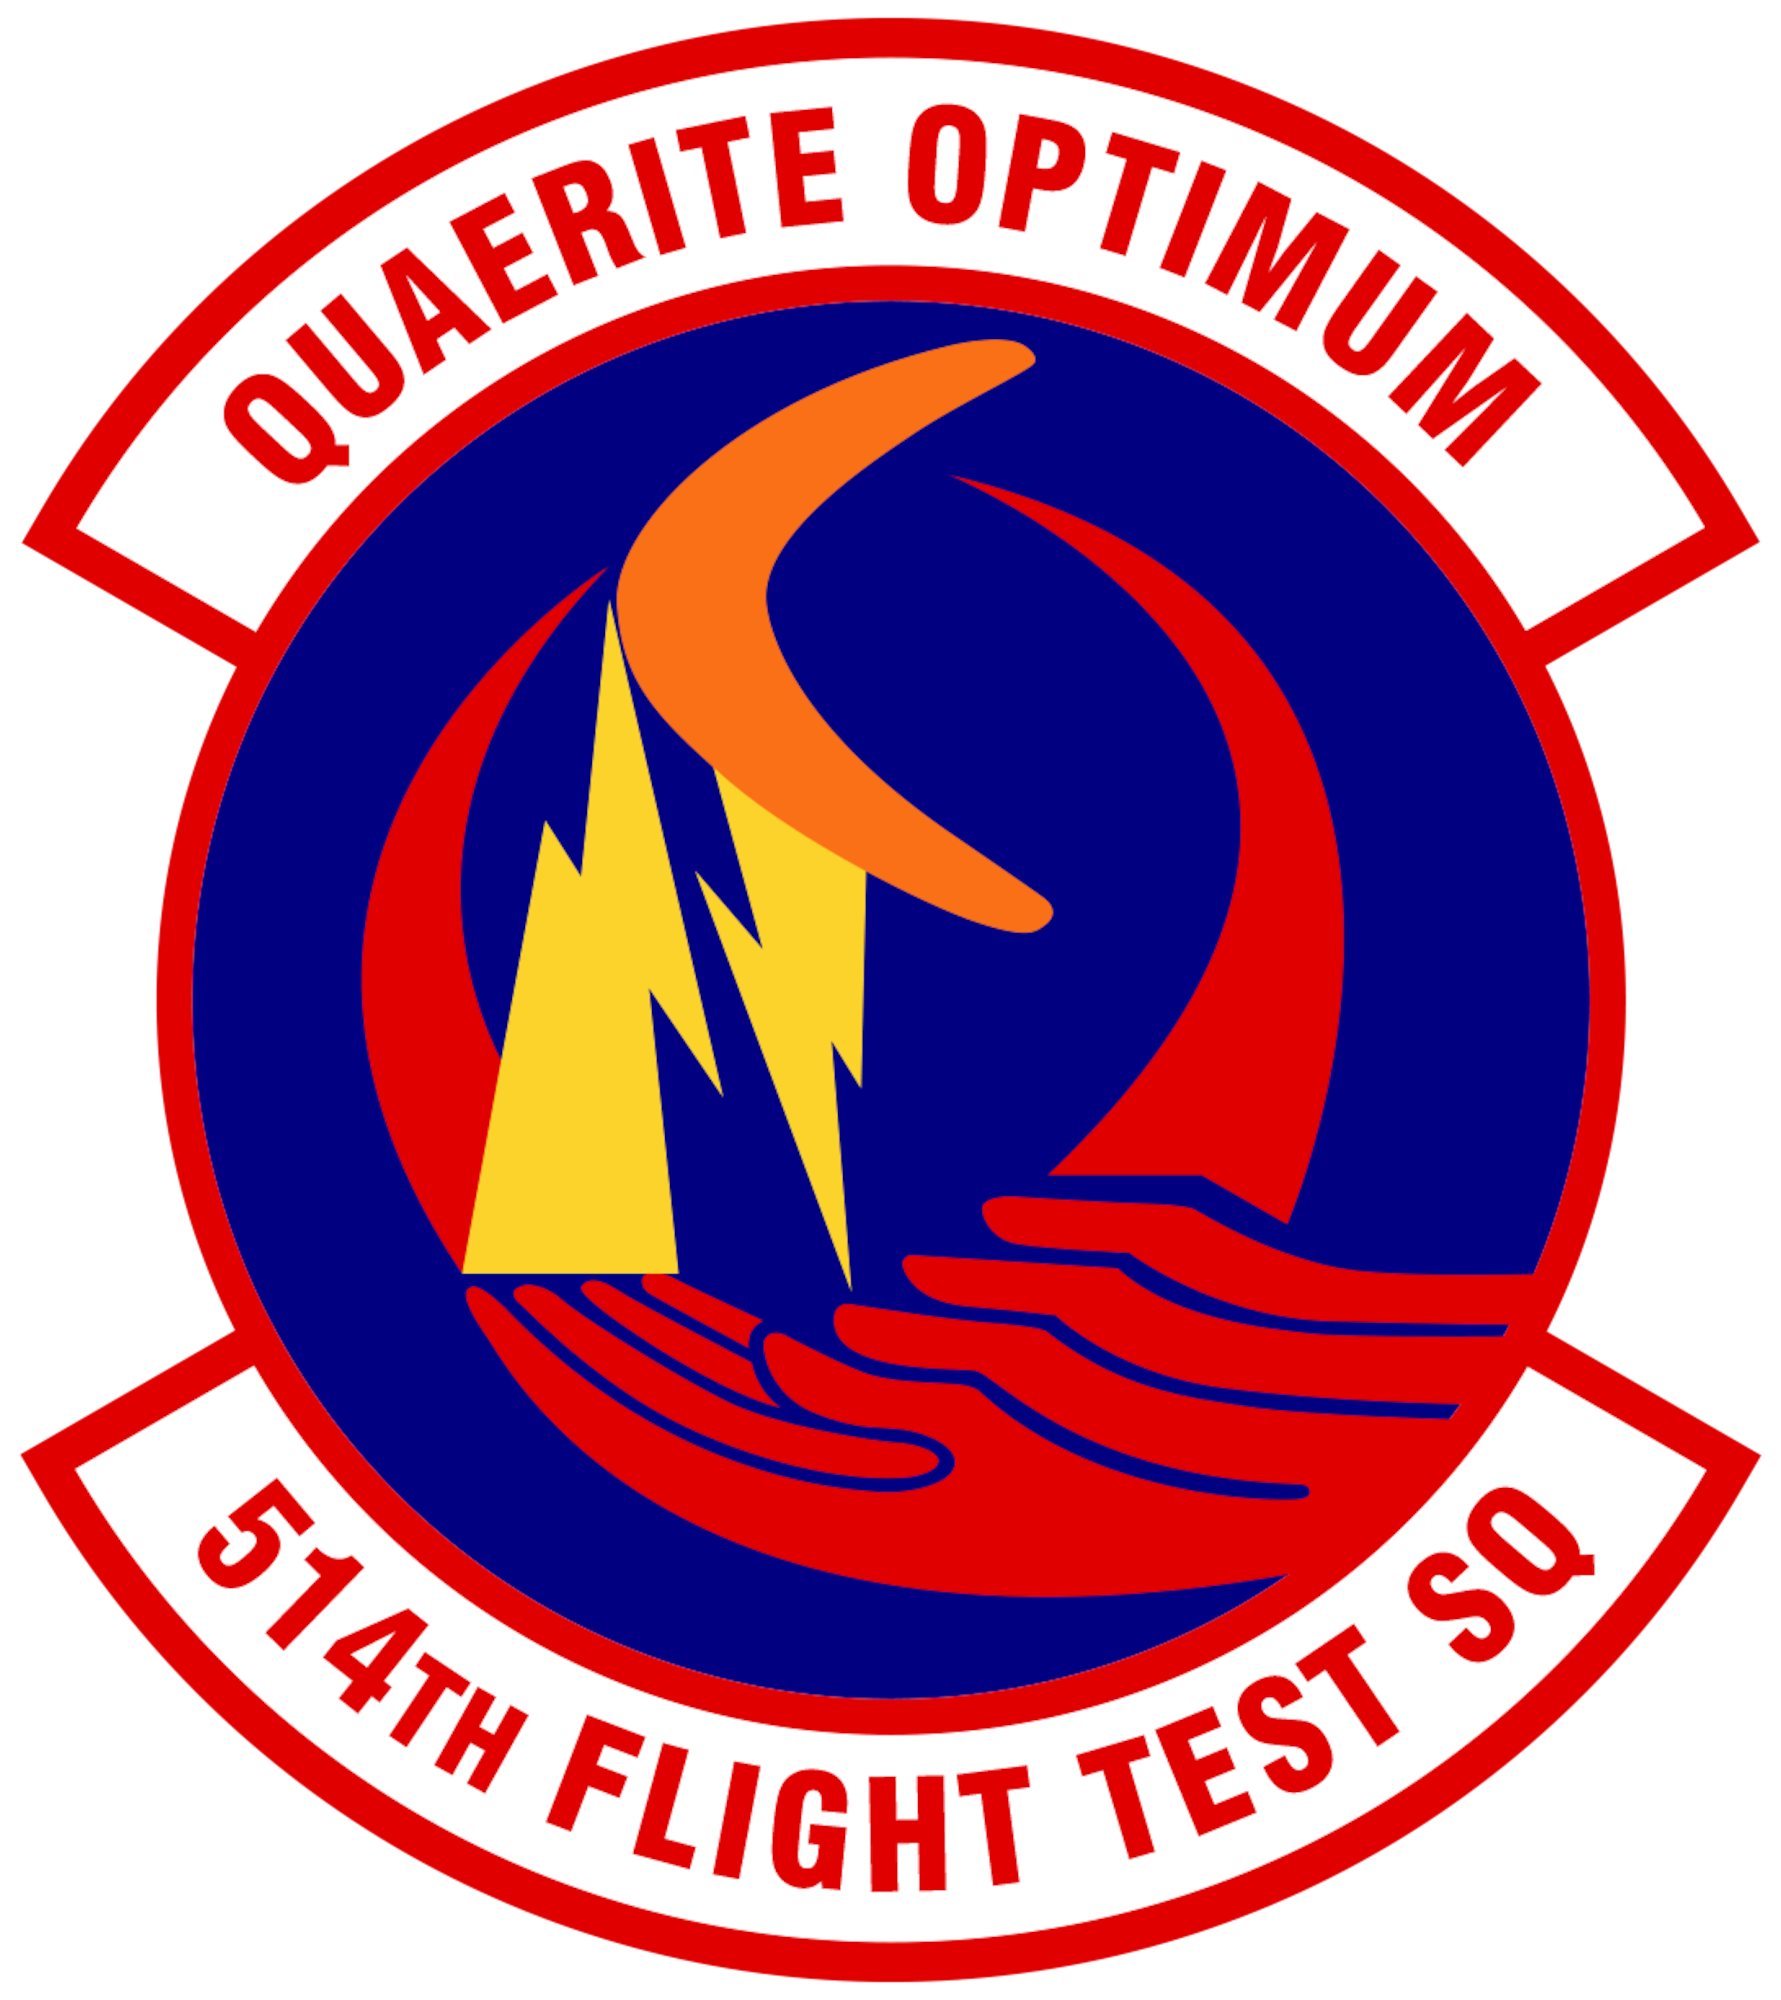 The 514th Flight Test Squadron at Hill Air Force Base, Utah, is one of five depot flight test units belonging to the 413th Flight Test Group, an Air Force Reserve Command unit based at Robins AFB, Georgia. The squadron condcuts functional check flights on aircraft to ensure they are airworthy after undergoing programmed depot maintenance. (U.S. Air Force graphic)